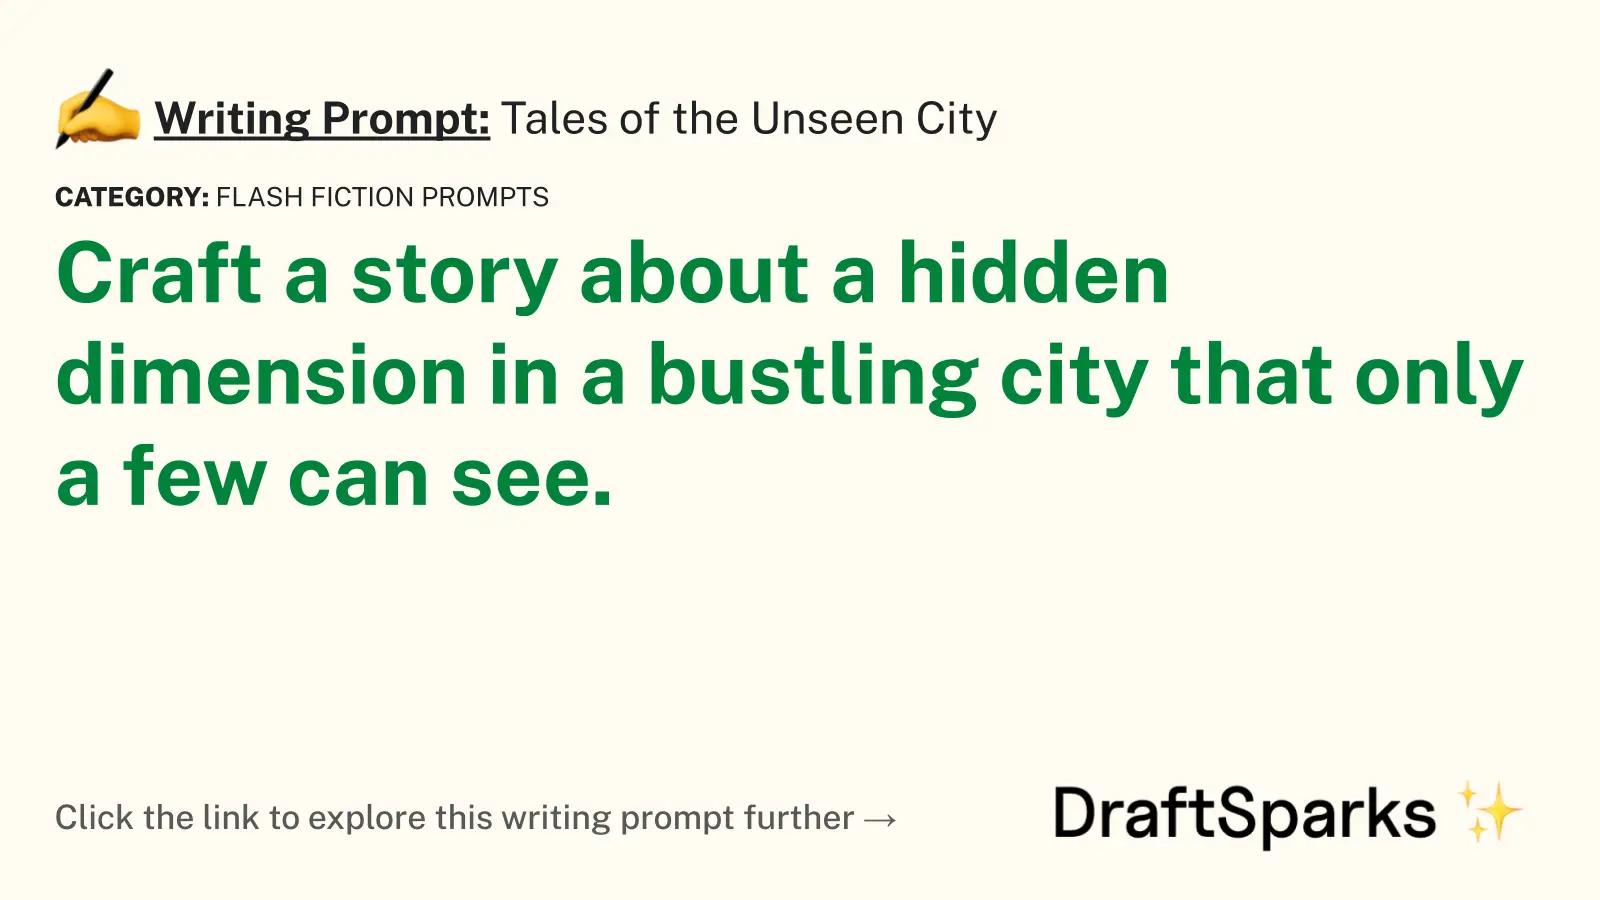 Tales of the Unseen City